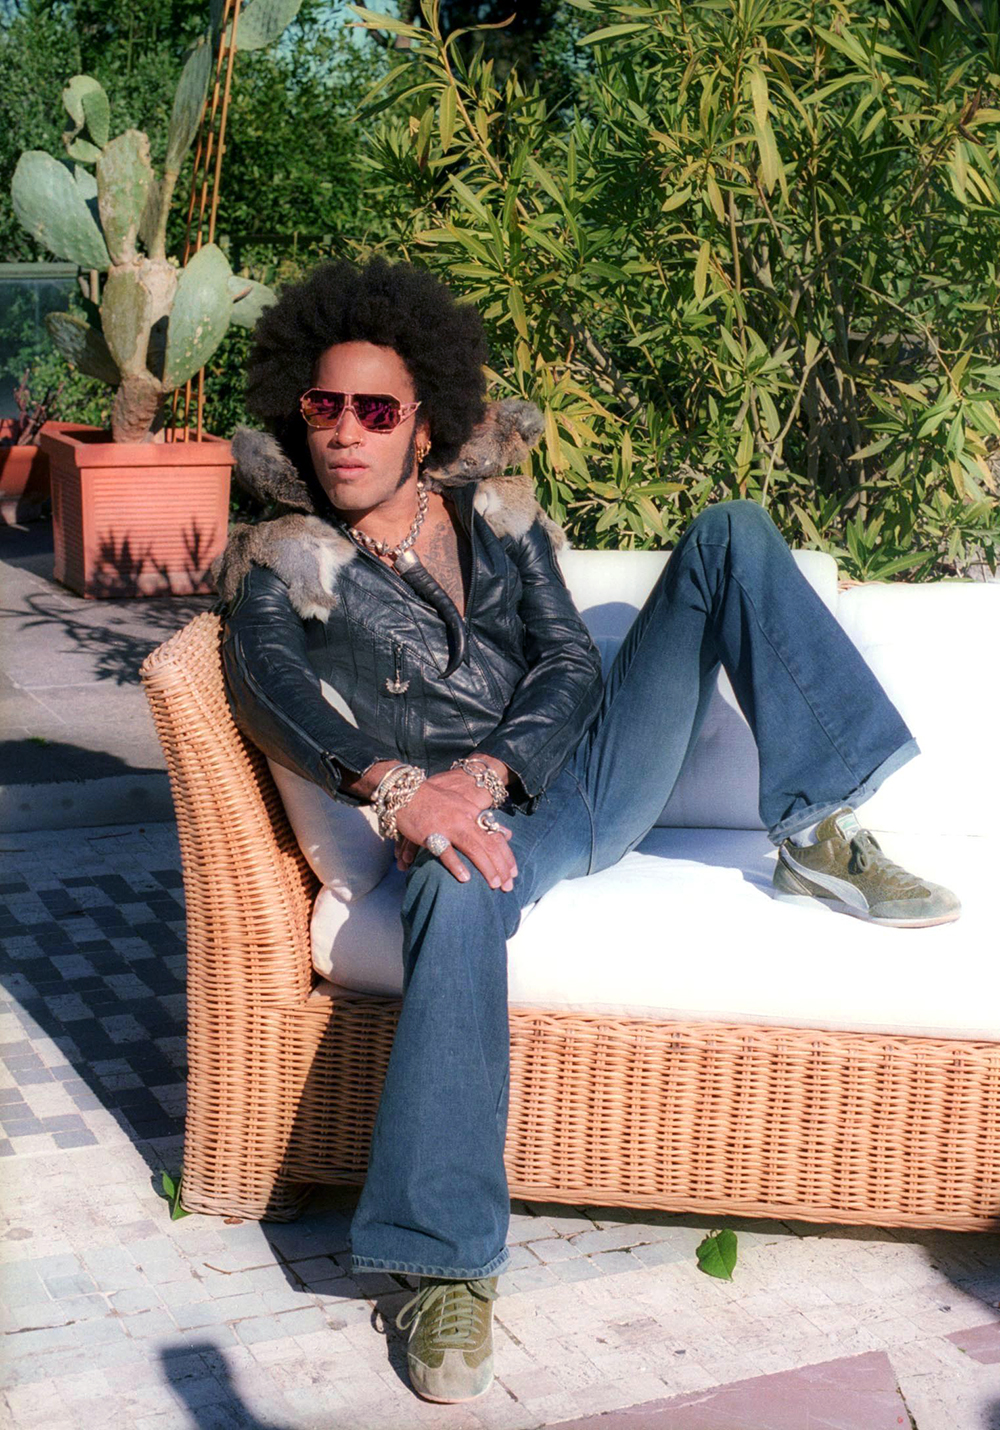 <p>Lenny Kravitz is relaxed during a photoshoot in Rome on Feb. 22, 2002. He wore bell bottom jeans for a very 70s attitude.</p>